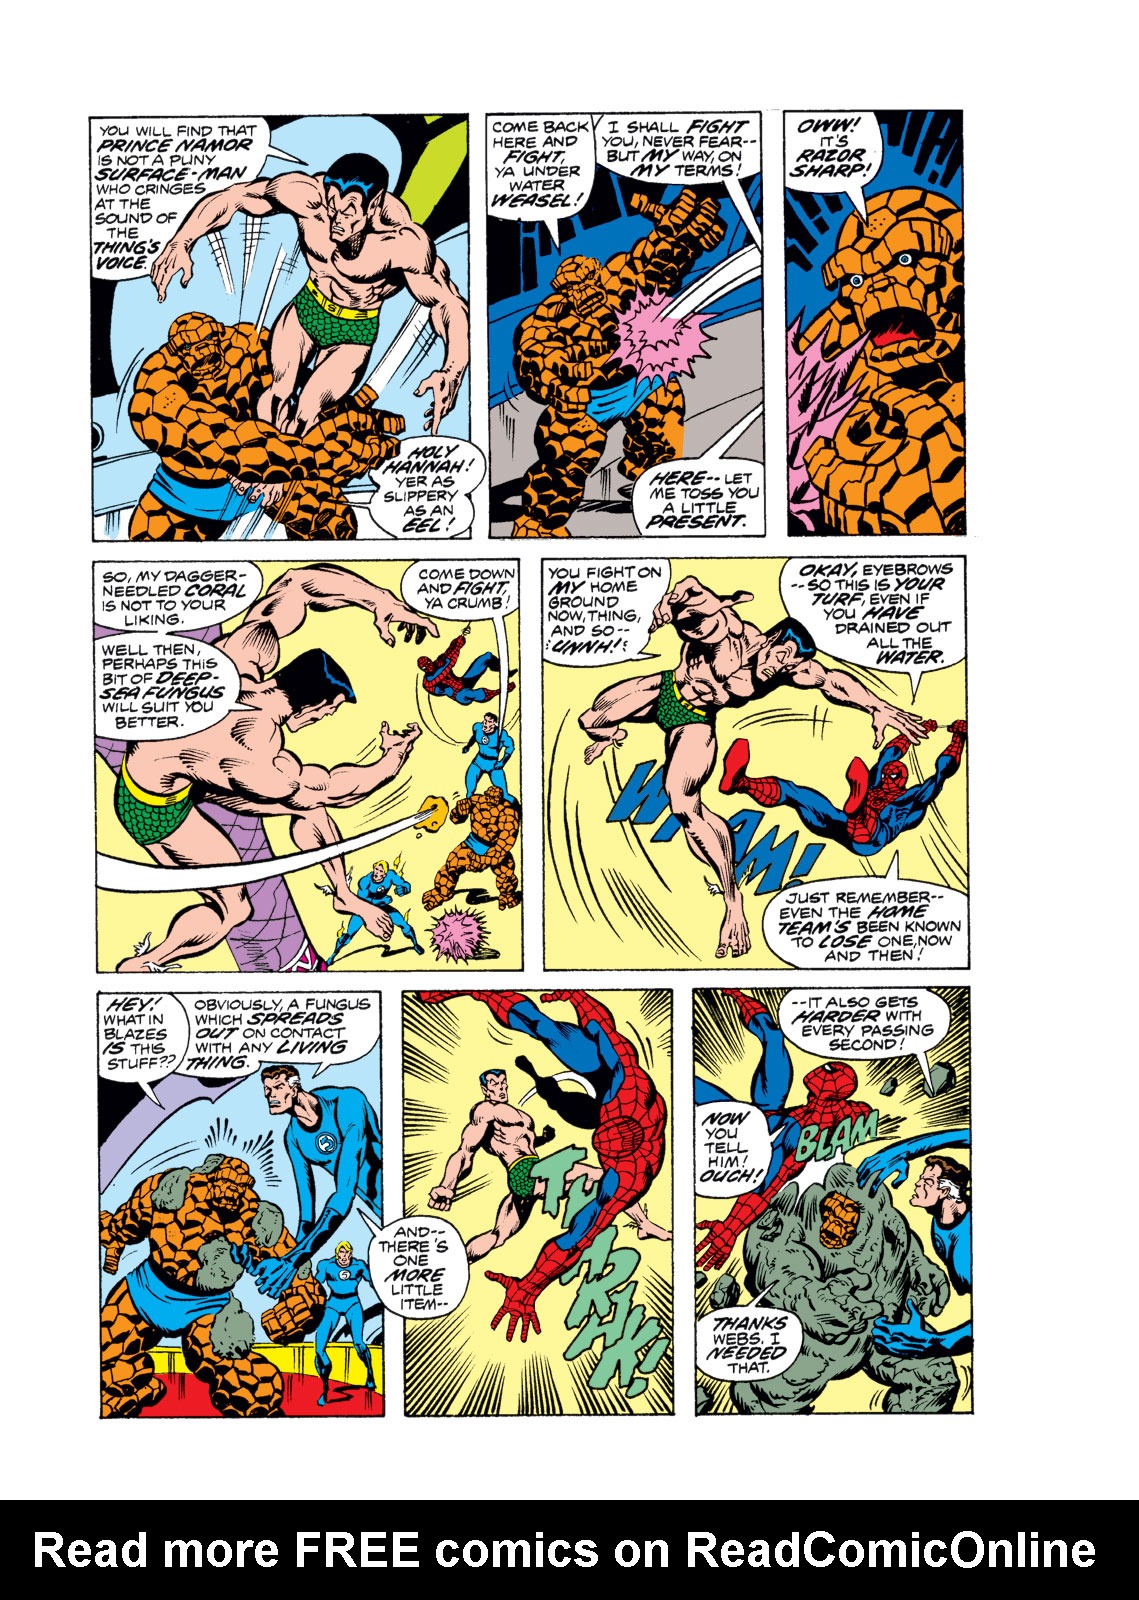 What If? (1977) issue 1 - Spider-Man joined the Fantastic Four - Page 27